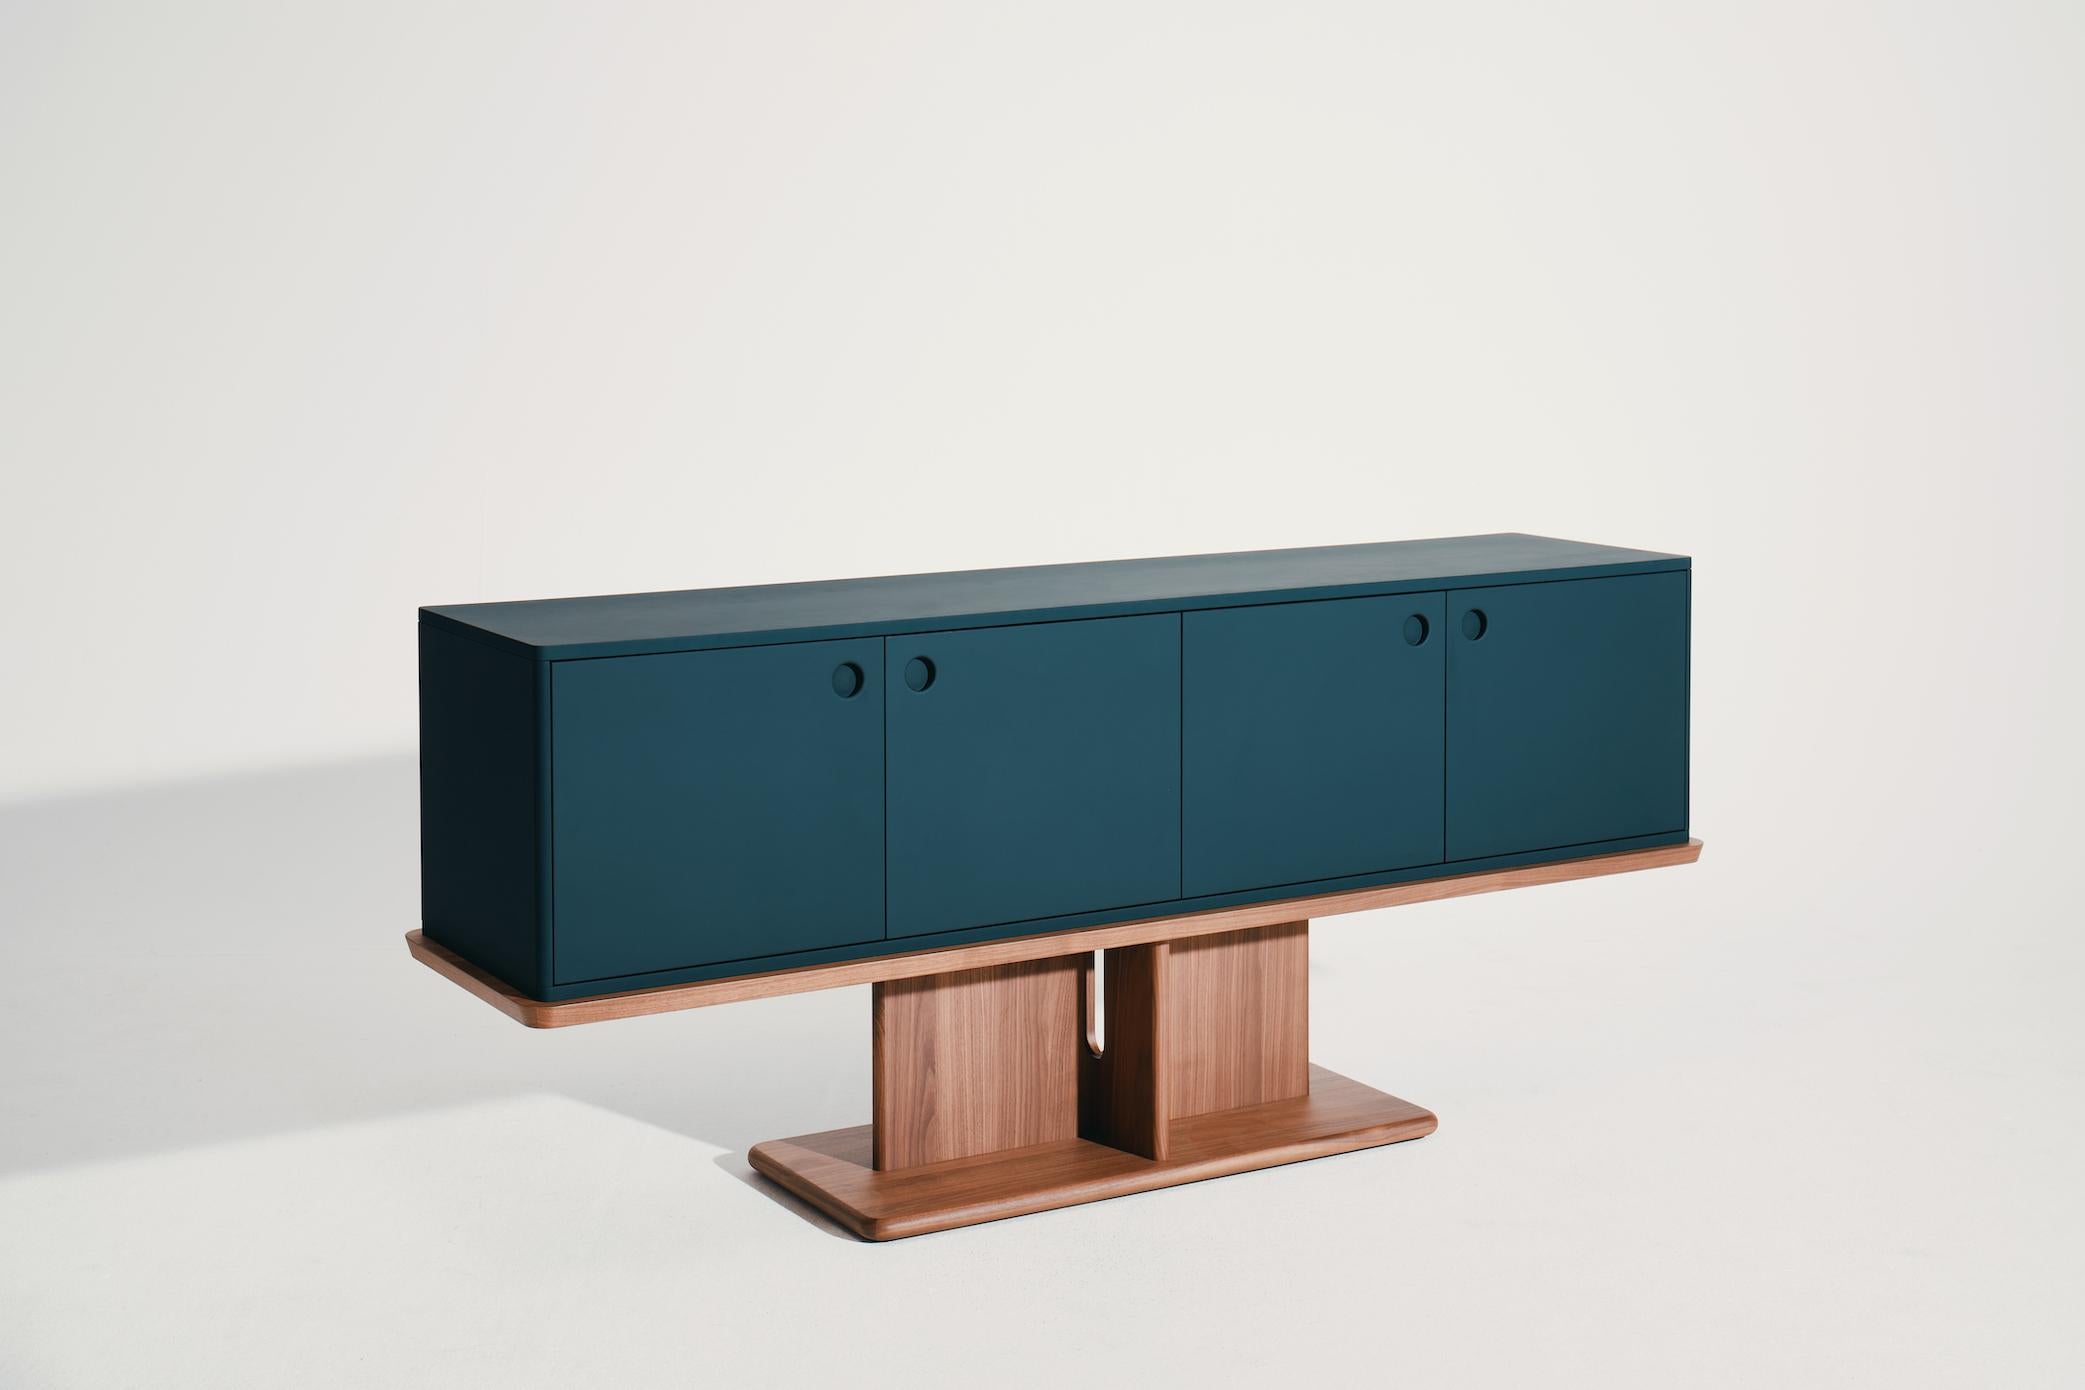 For La Manufacture, Neri&Hu have designed a range of sideboards within their ‘Intersection ’collection celebrating monastery life. The use of natural or stained wood panels for the horizontal and vertical elements, and the pedestal leg give this